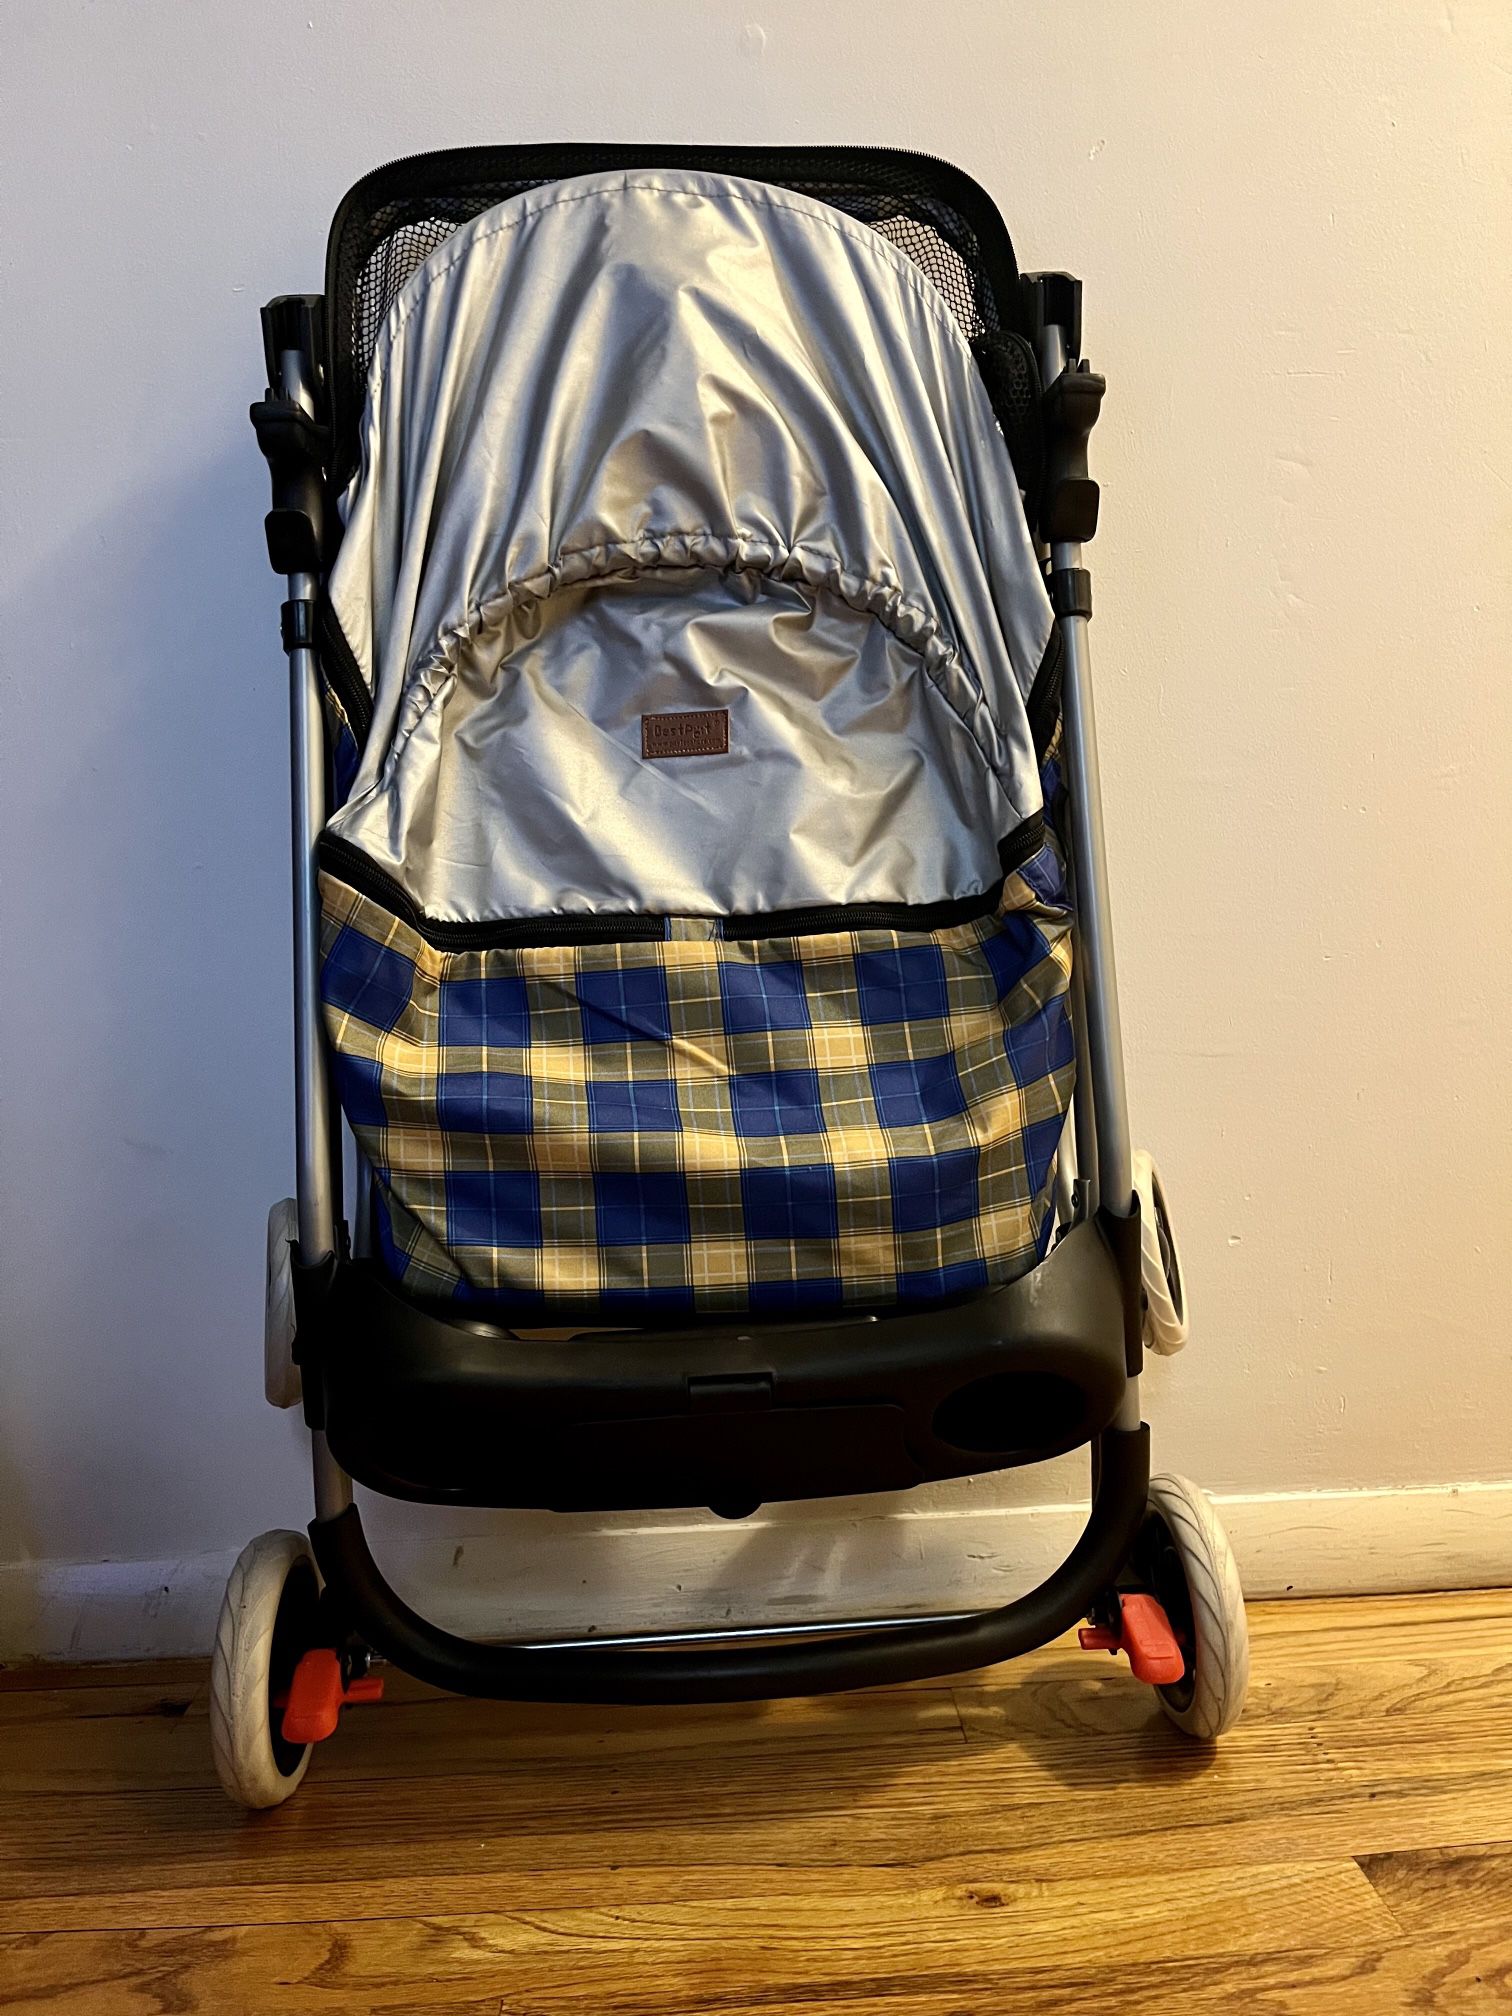 Indoors & Outdoors Pet Folding Stroller With 4 Rolling Wheels Posh / Yellow Plaid